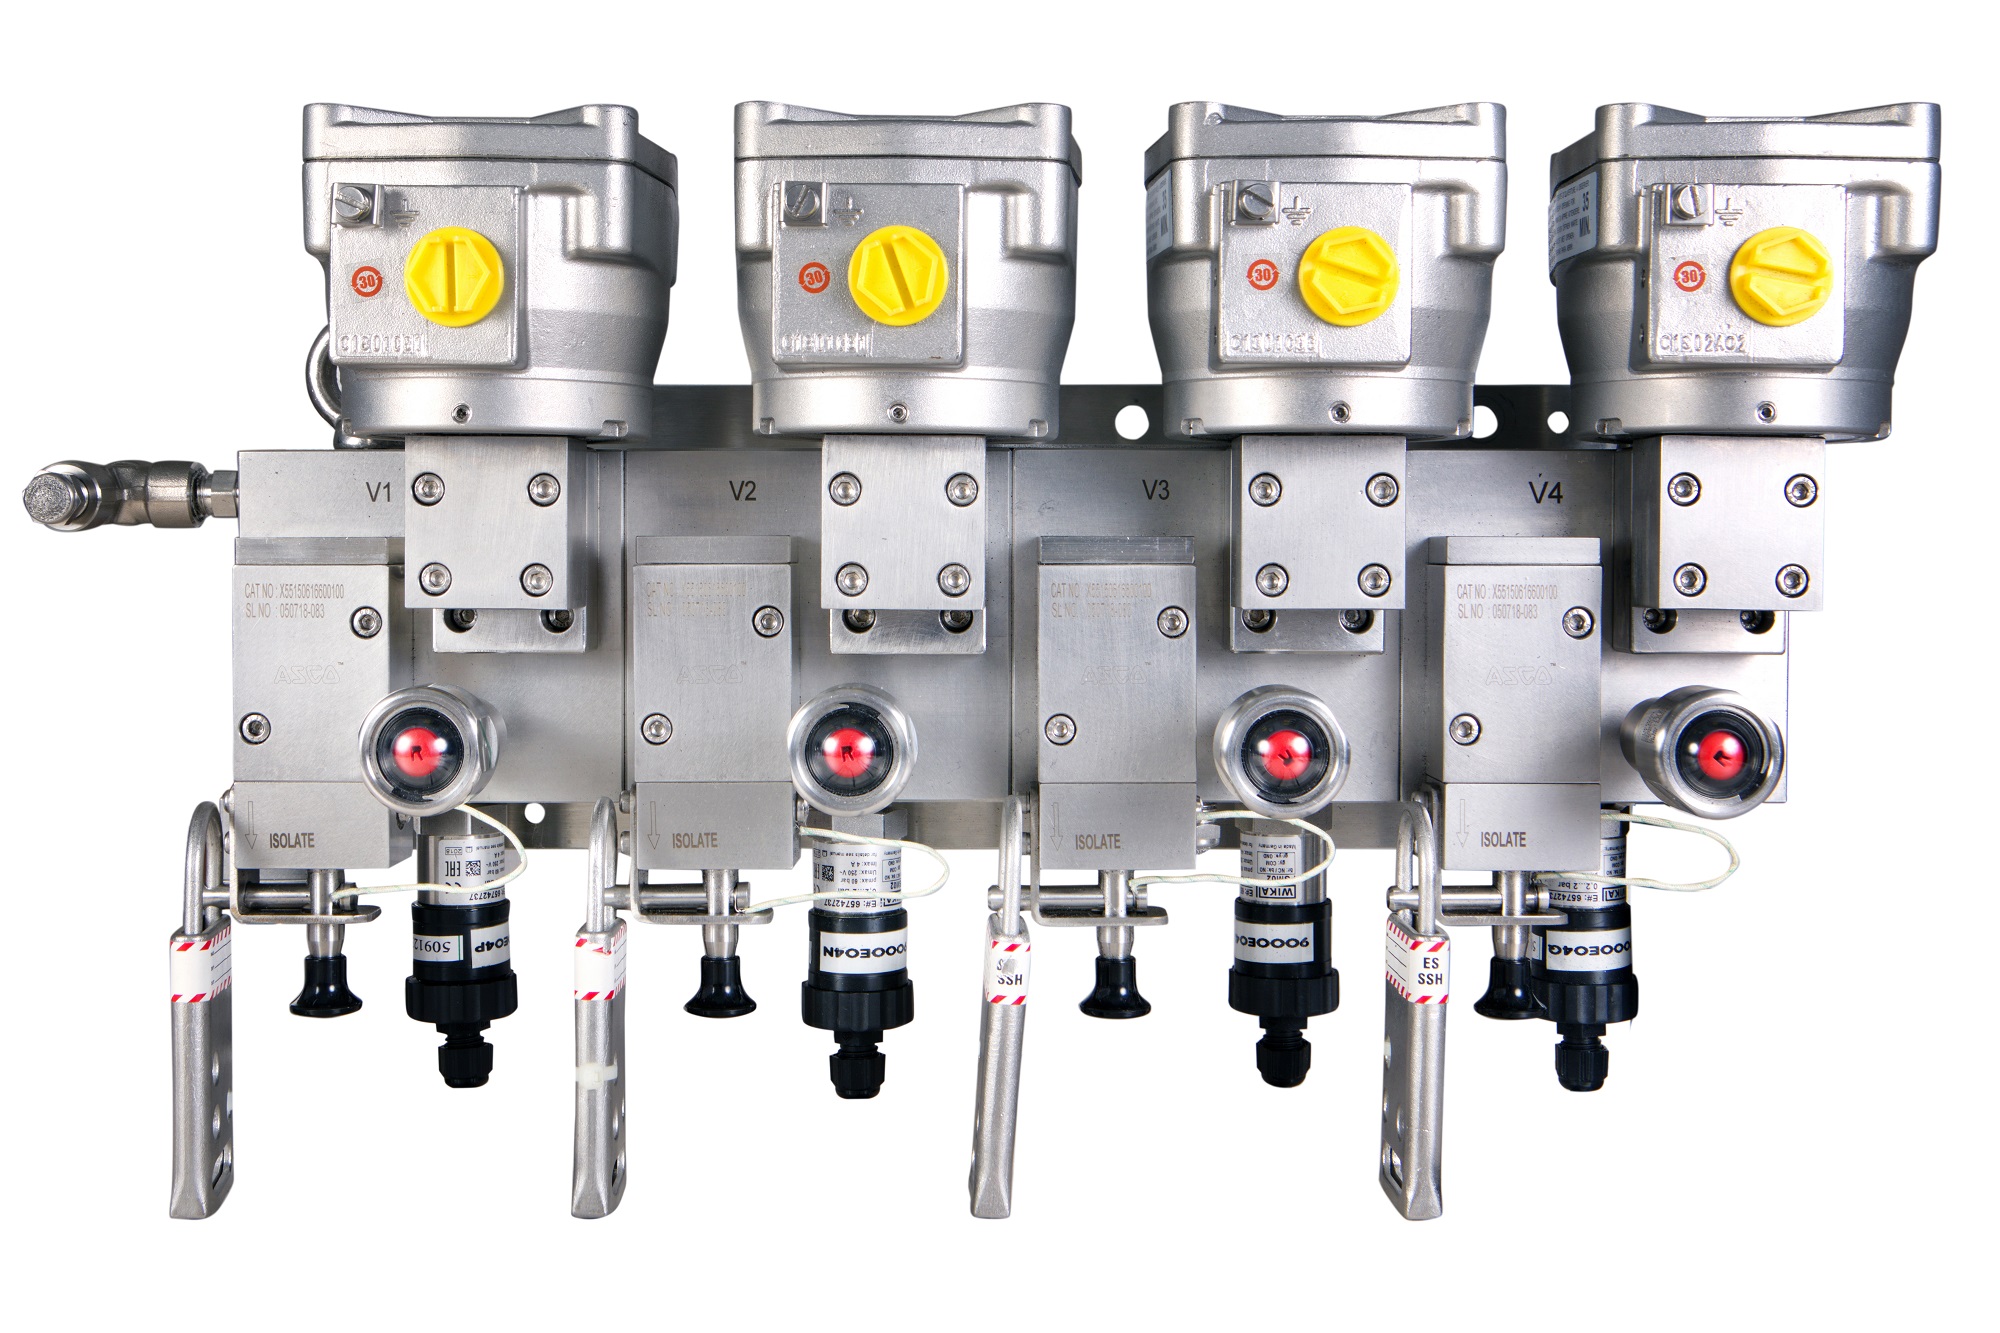 ARCS has individual valve isolation for online maintenance without process interruption.